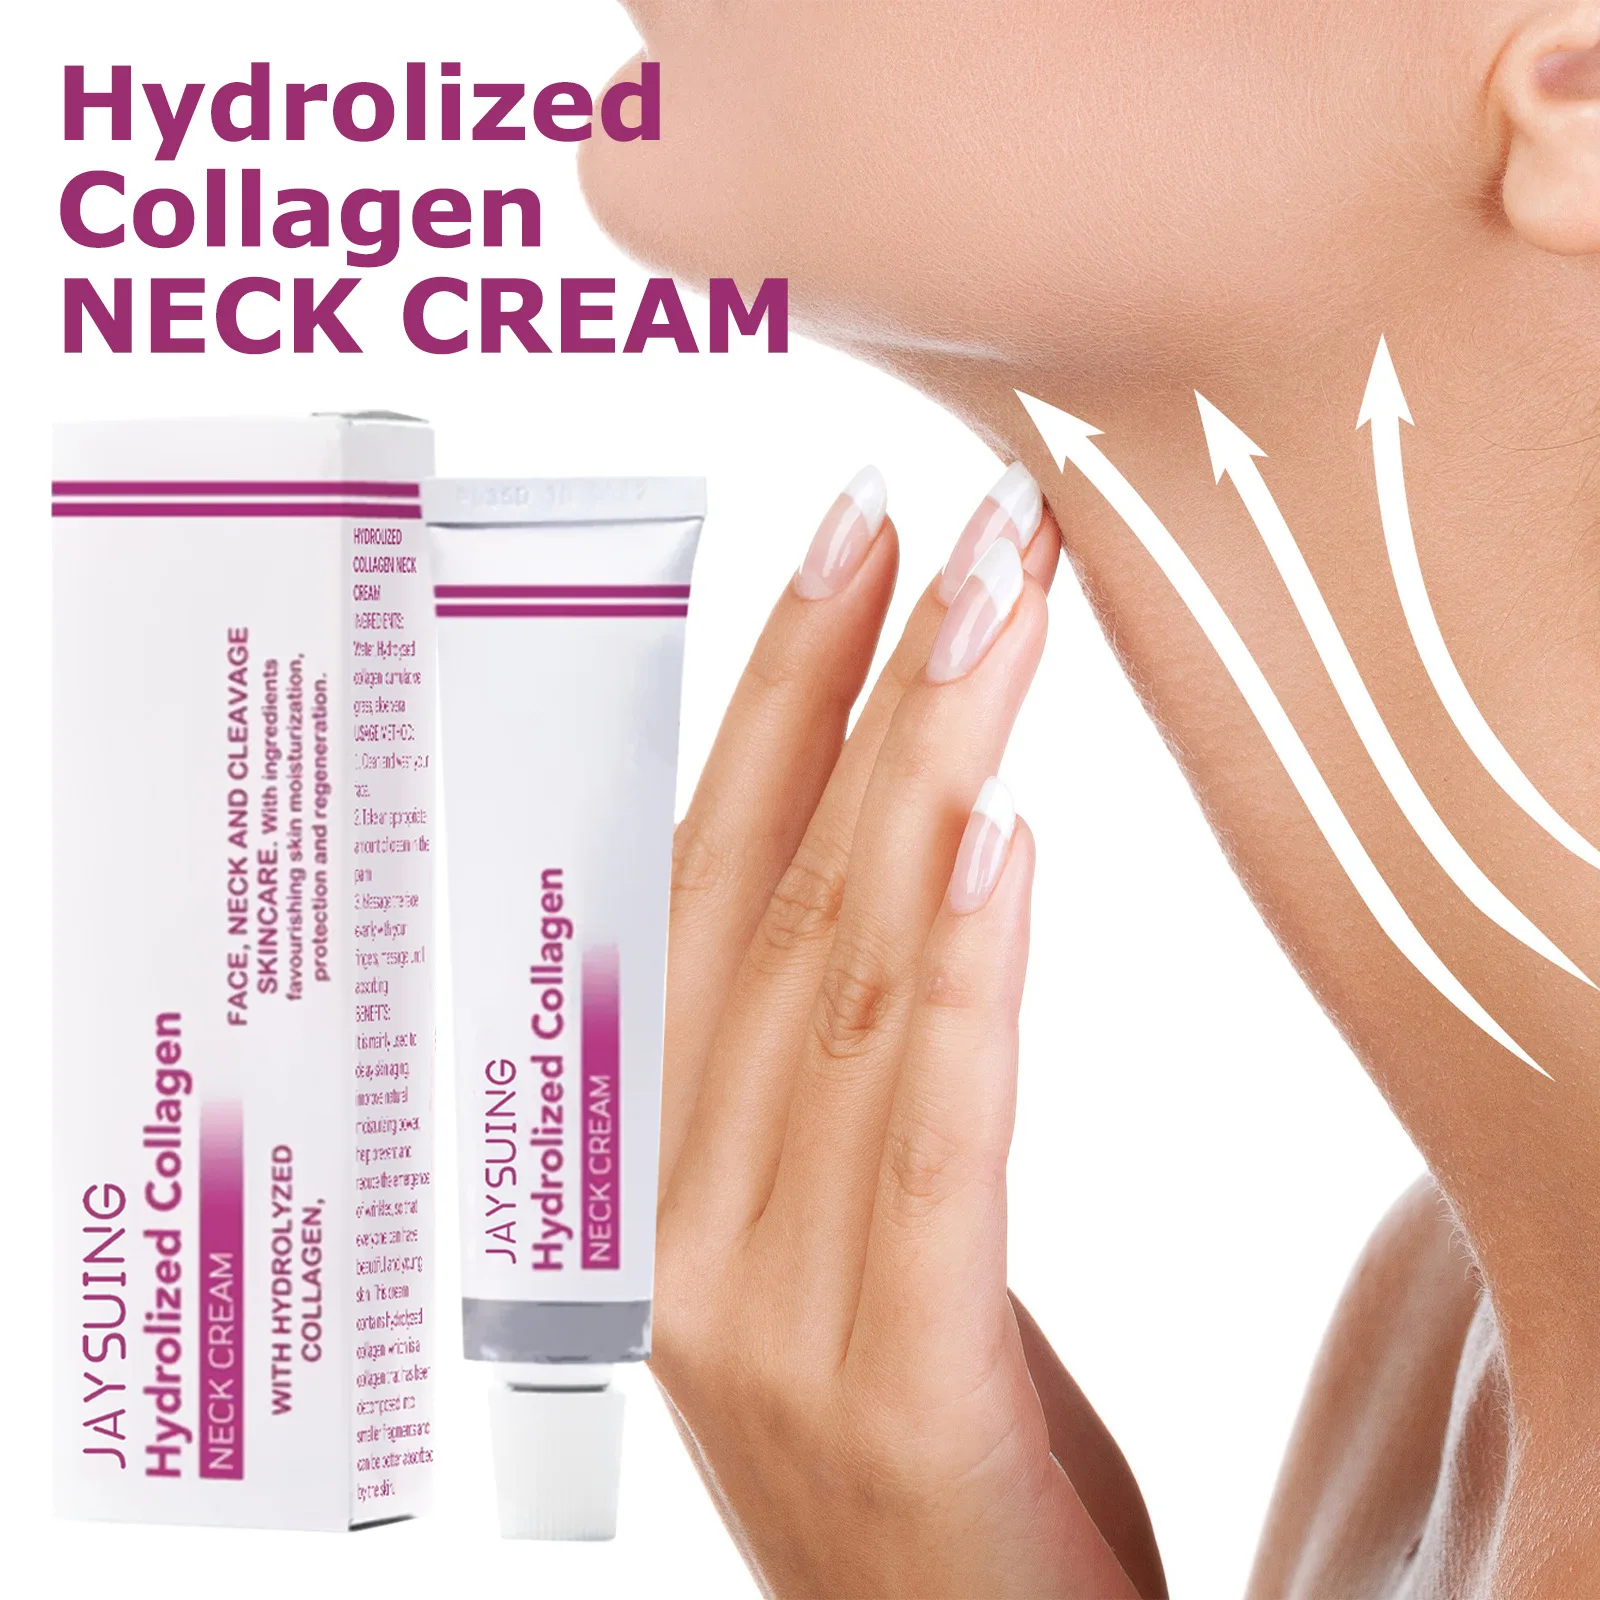 Hydrolyzed Collagen Neck Cream smooths and whitens, smooths and fades neck lines, and shapes a swan neck beautiful neck cream emer kenny fades into day 1 cd